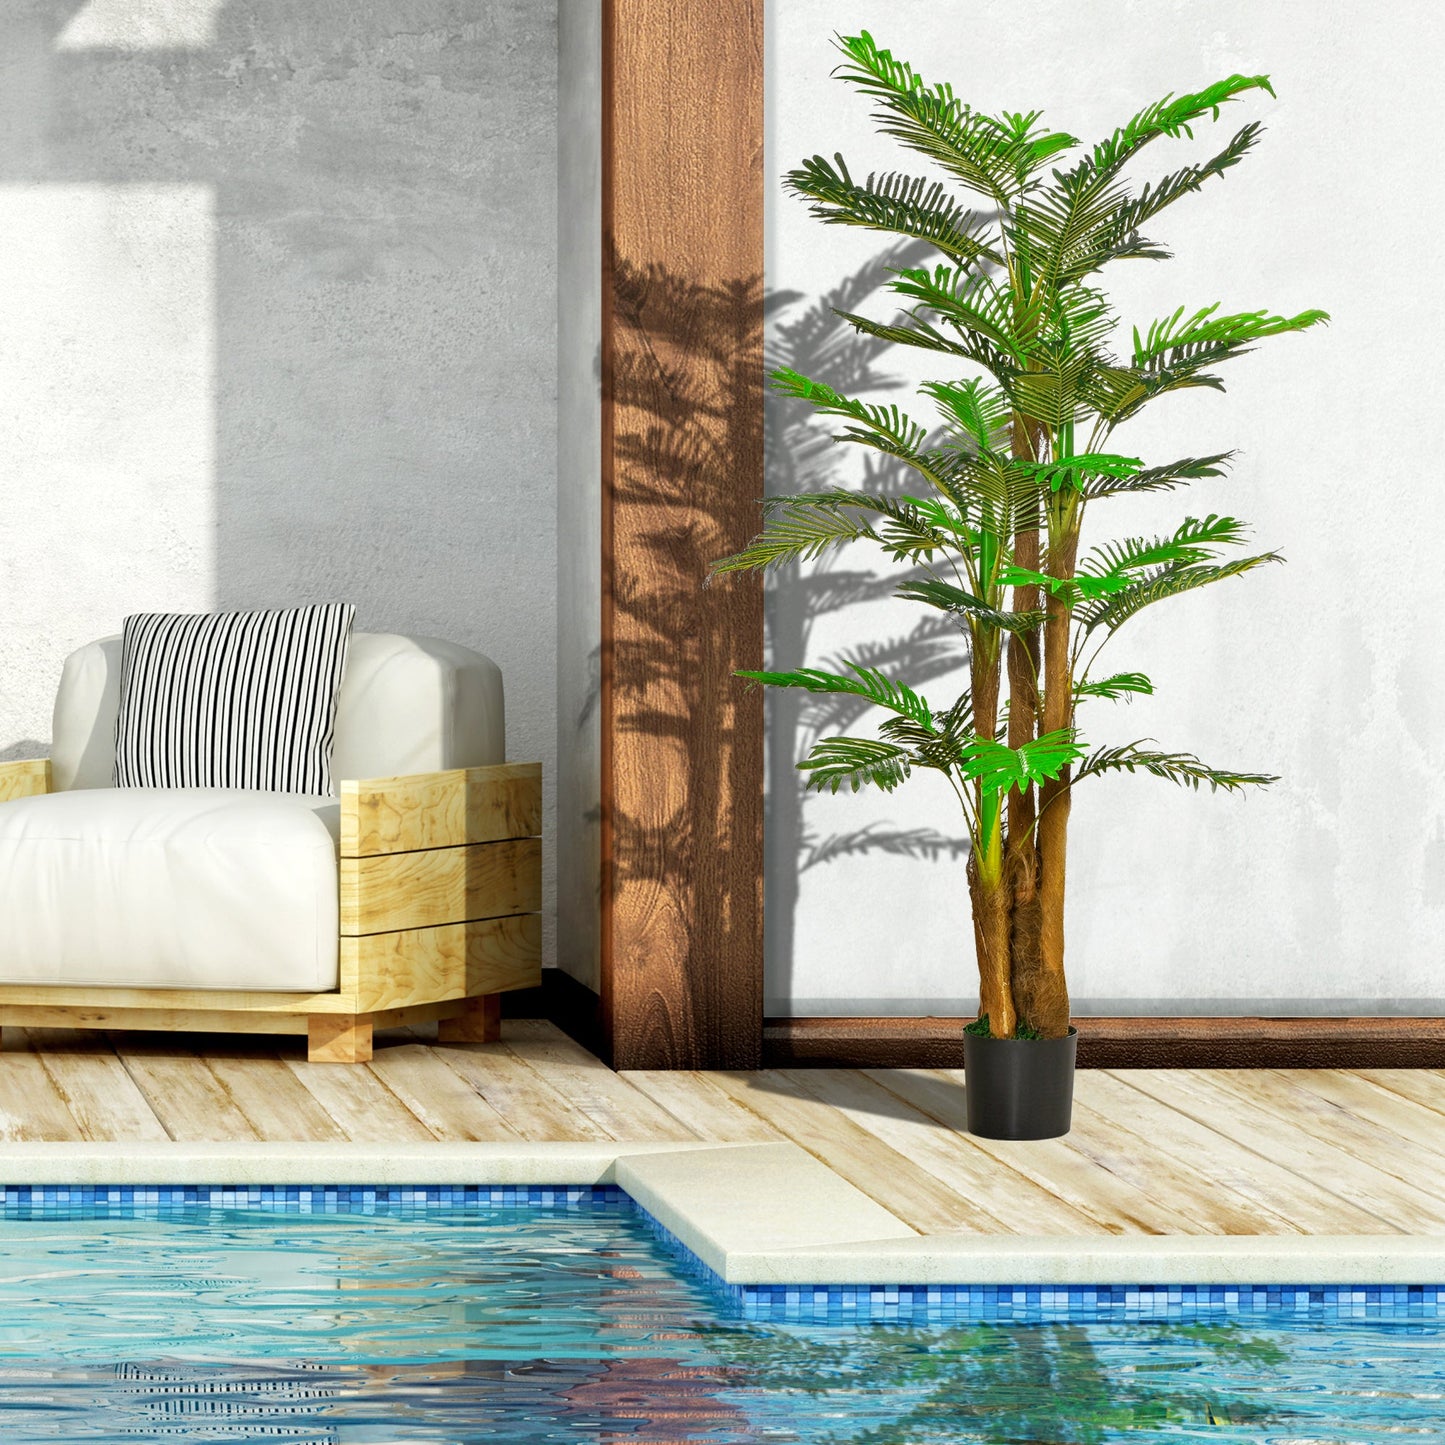 6FT Artificial Tropical Palm Tree Faux Decorative Plant in Nursery Pot for Indoor Outdoor Décor at Gallery Canada